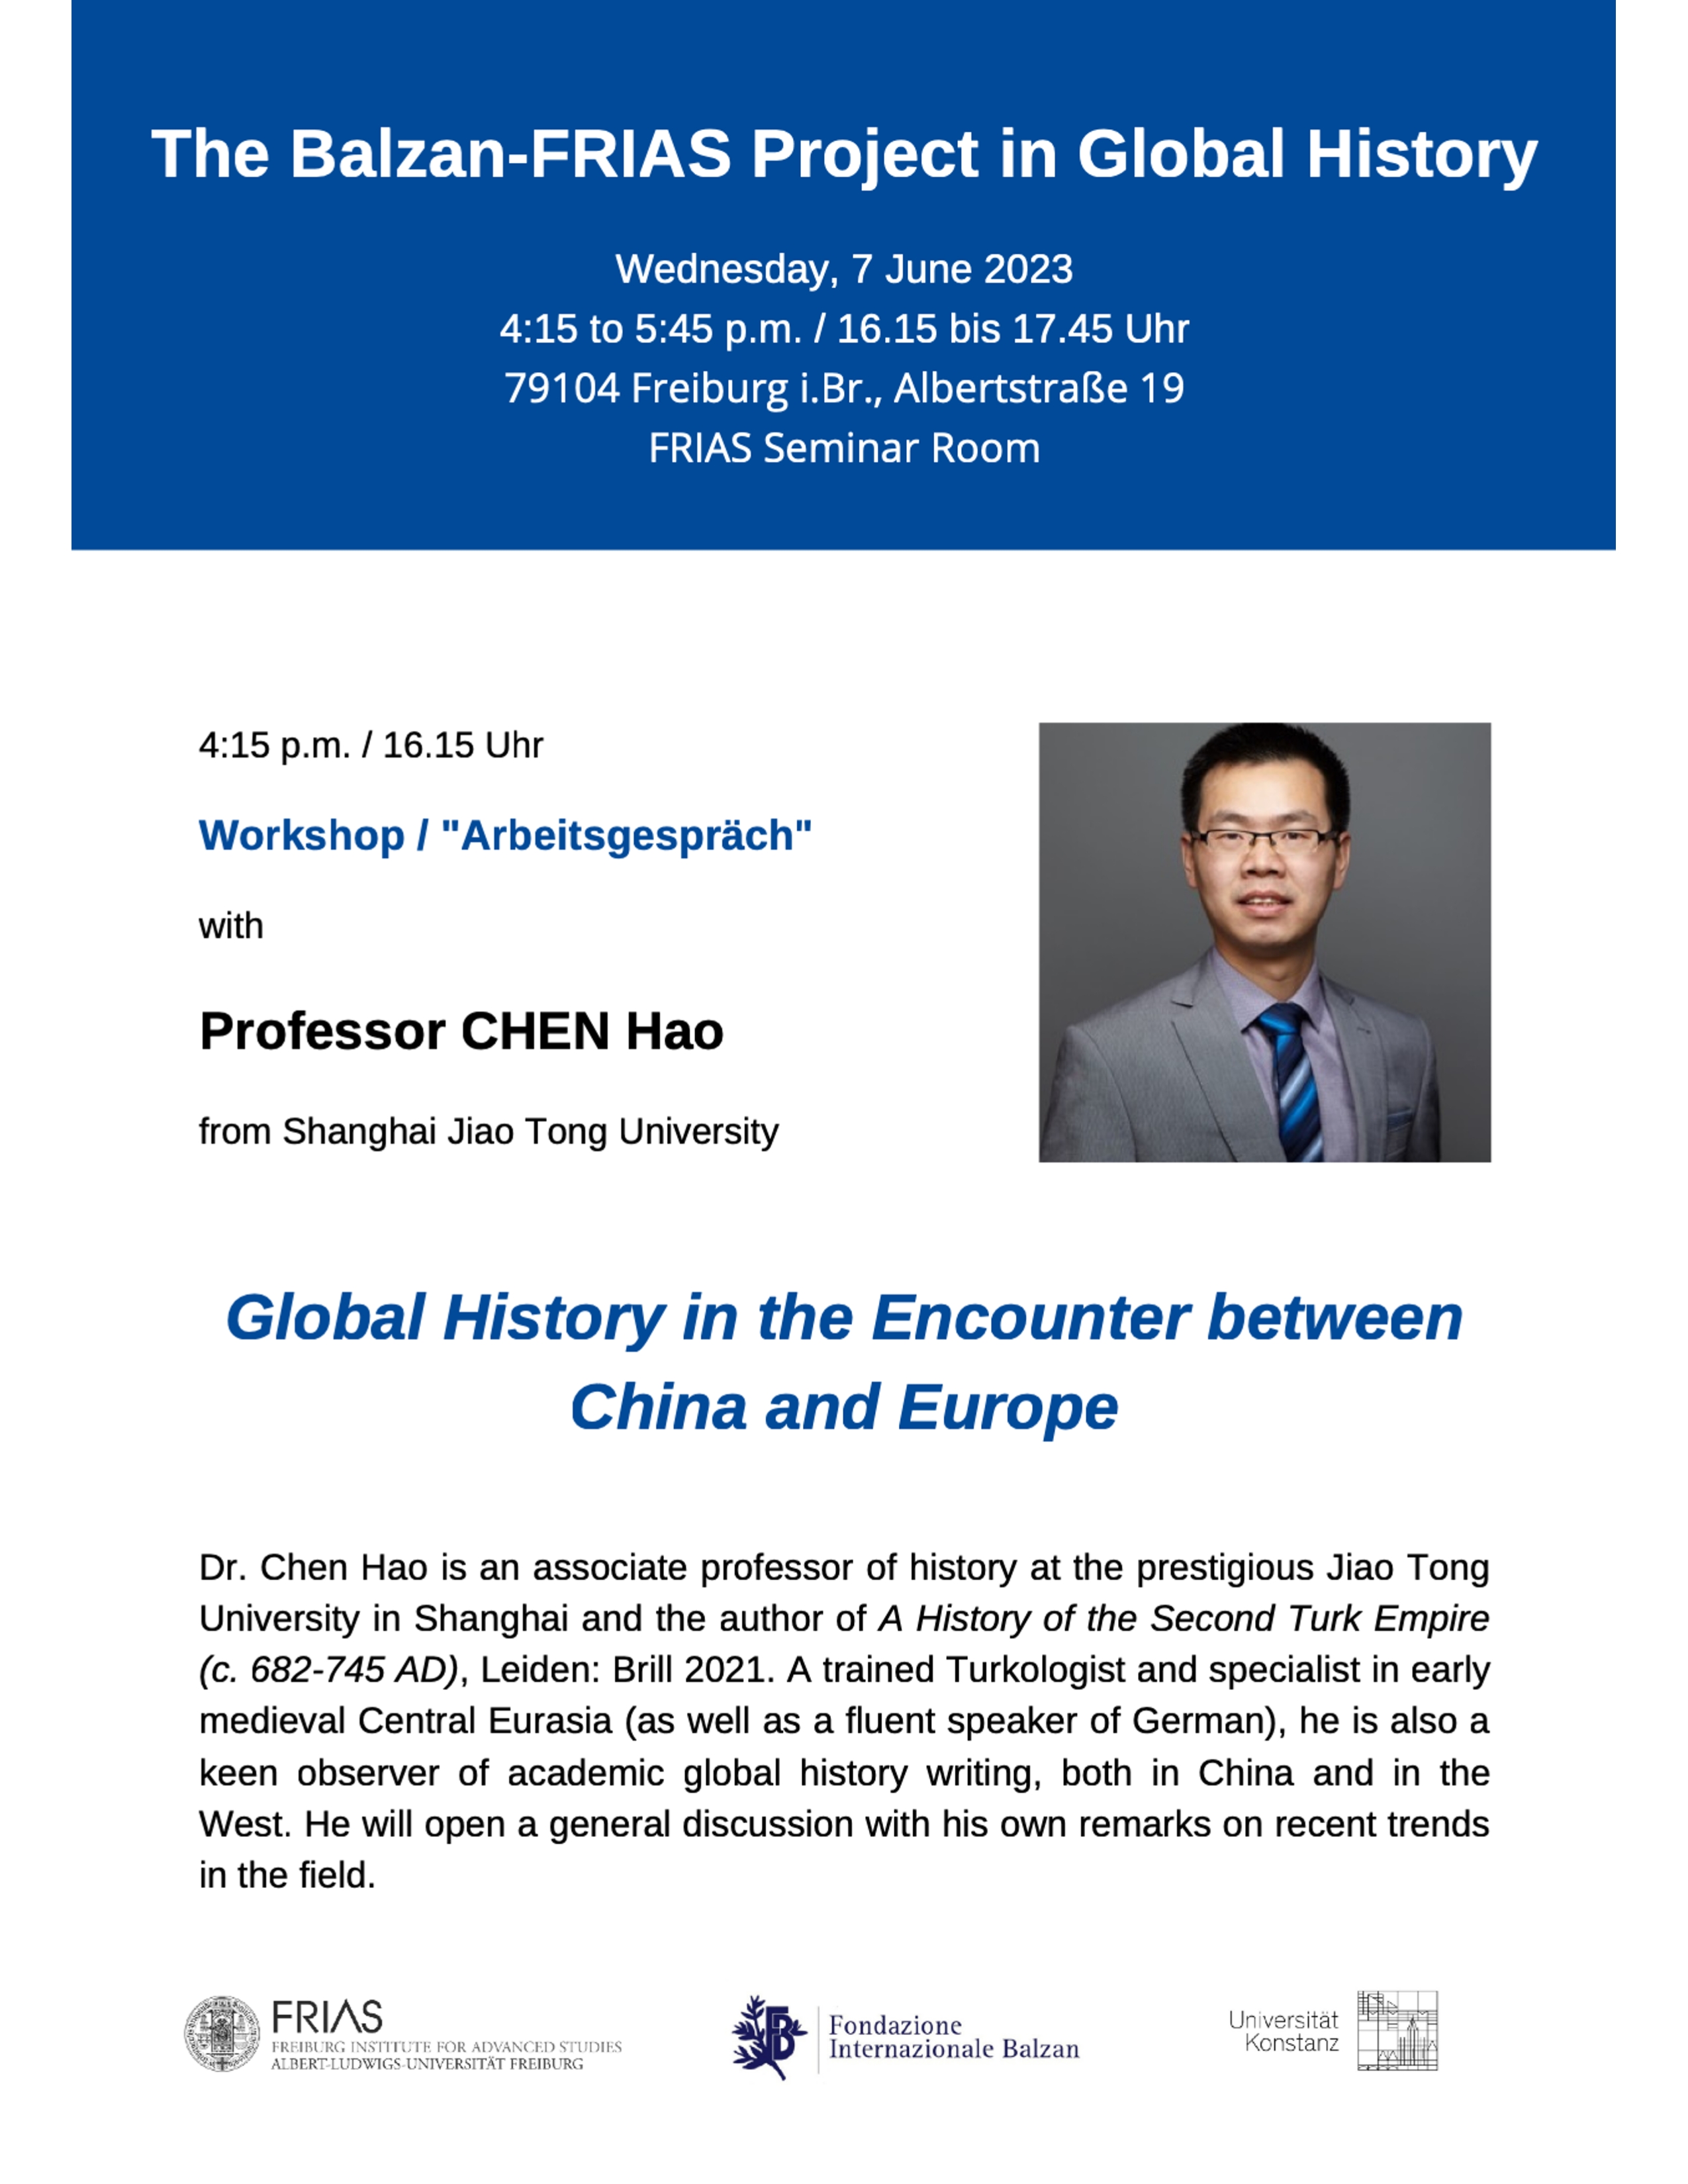 Workshop: Global History in the Encounter between China and Europe